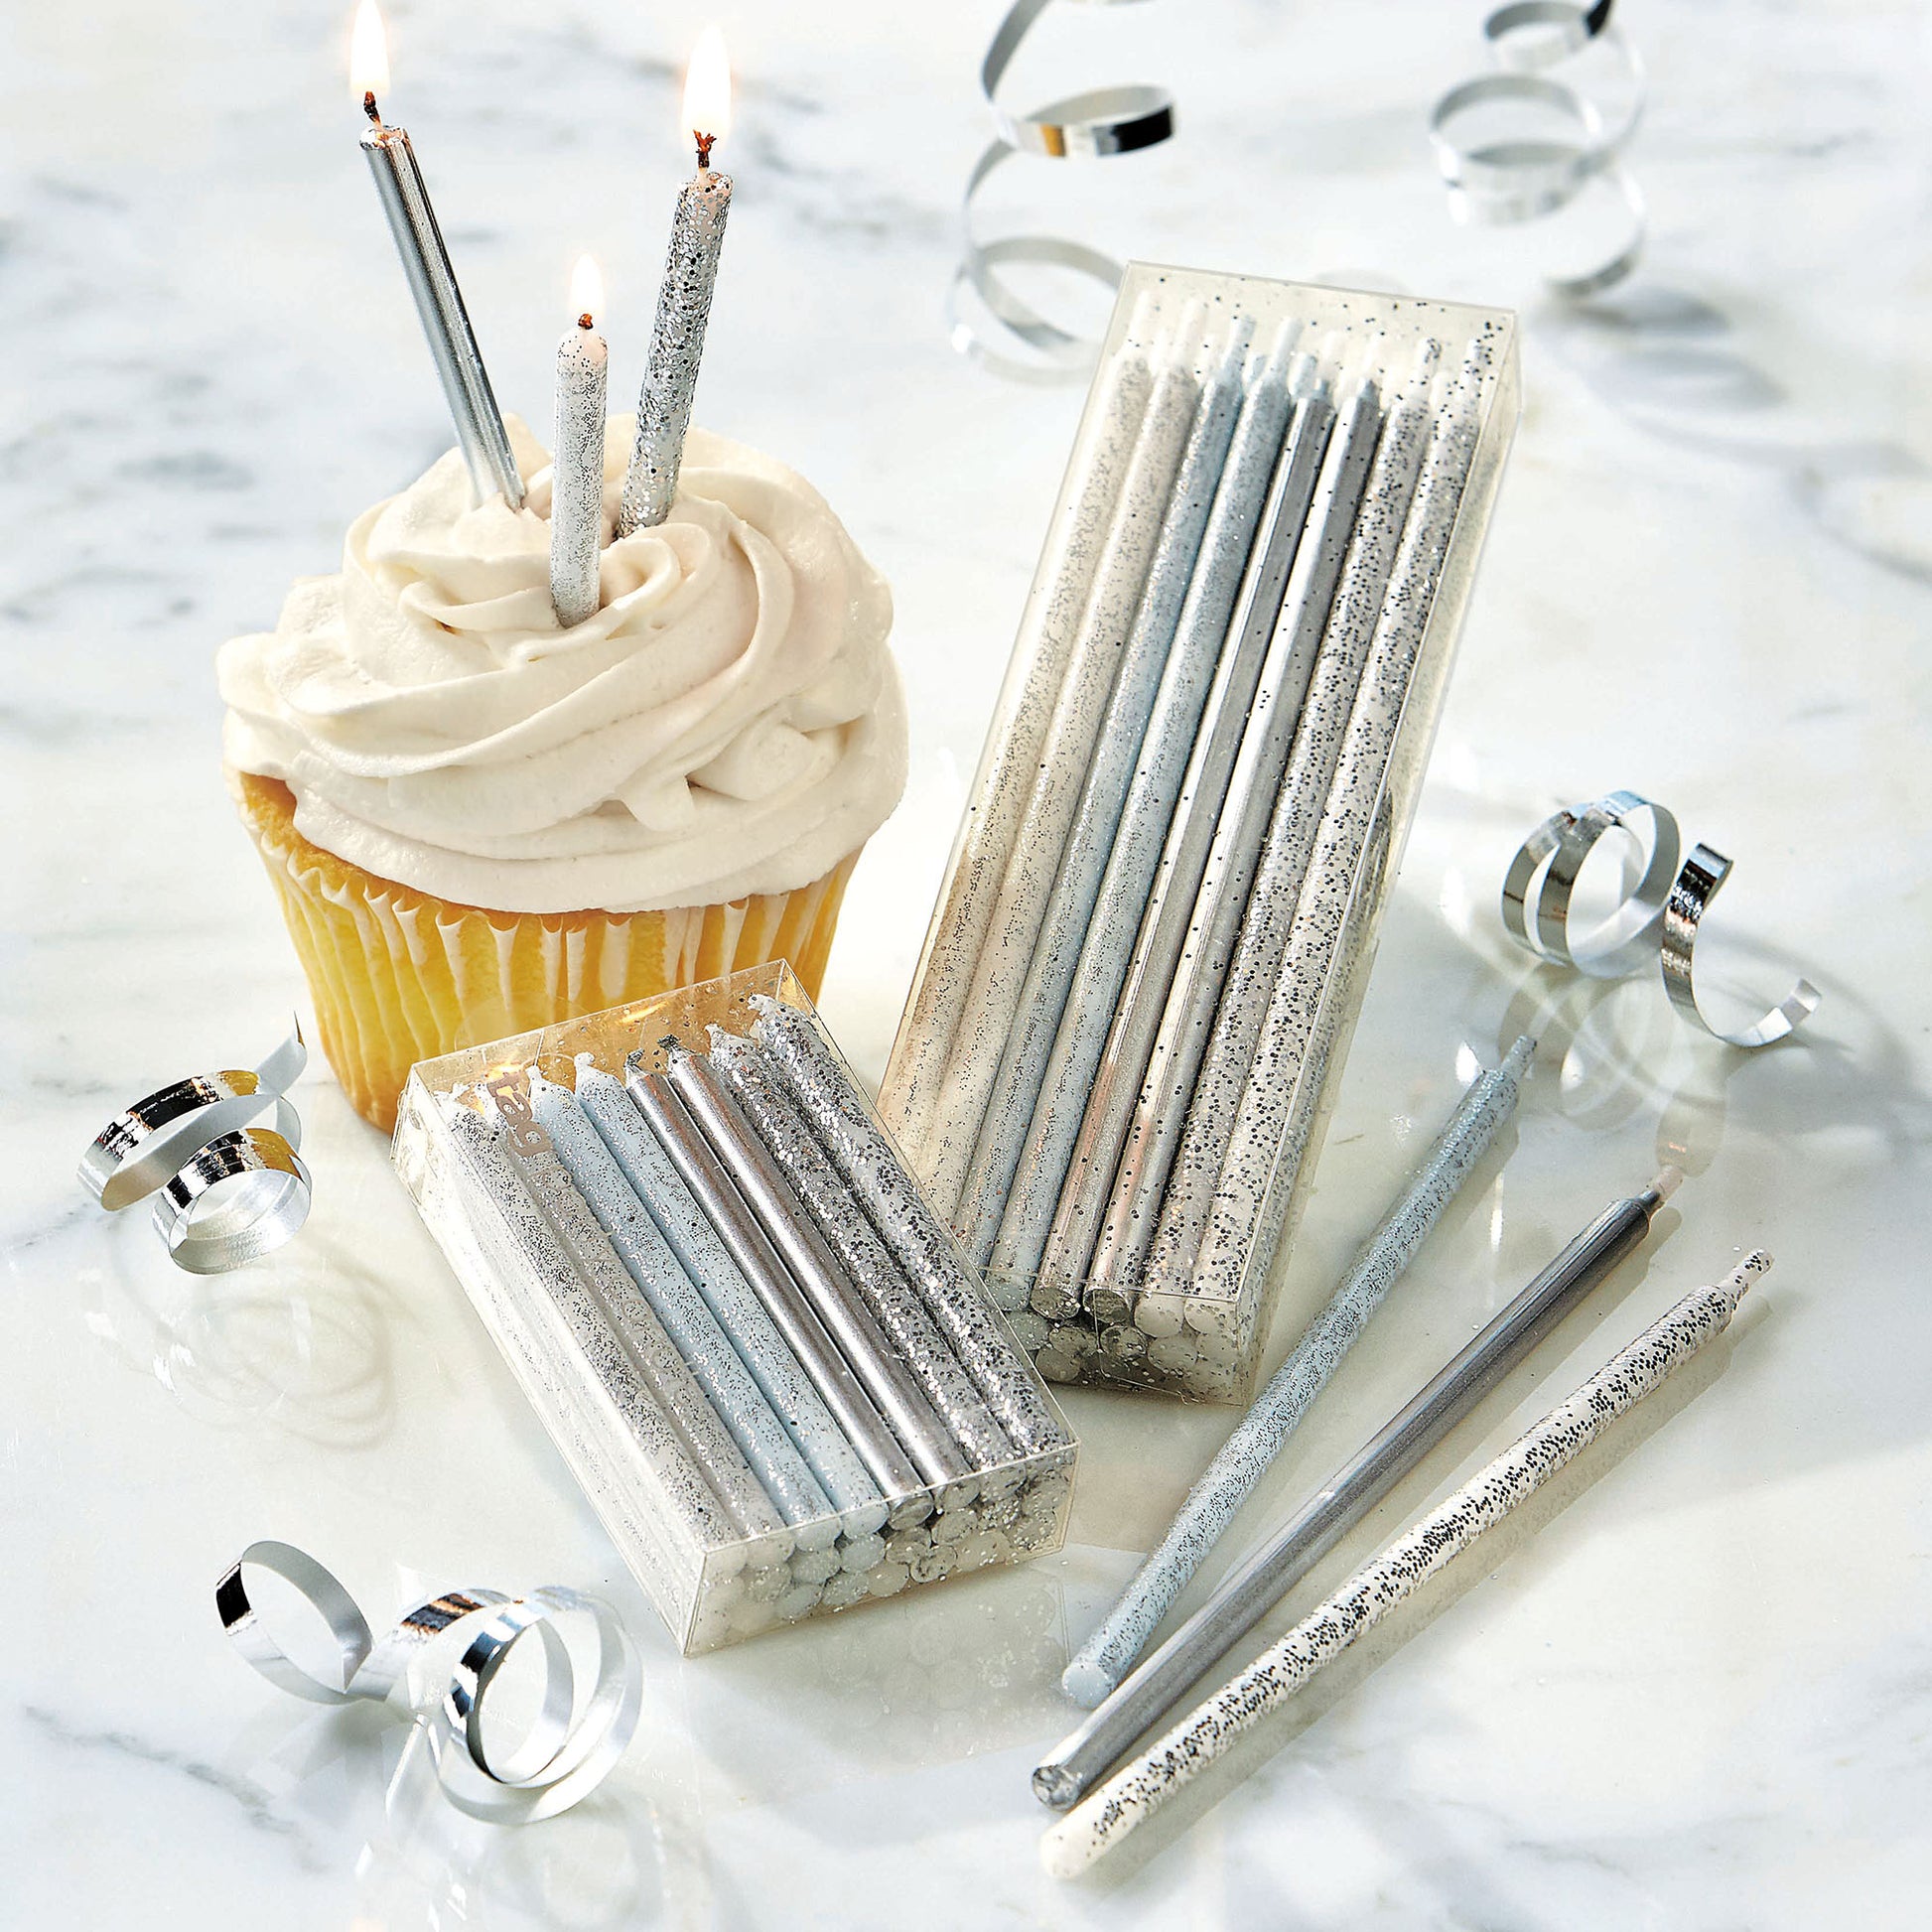 packages of silver and glittered candle, cupcake with candles in it, and confetti on table.